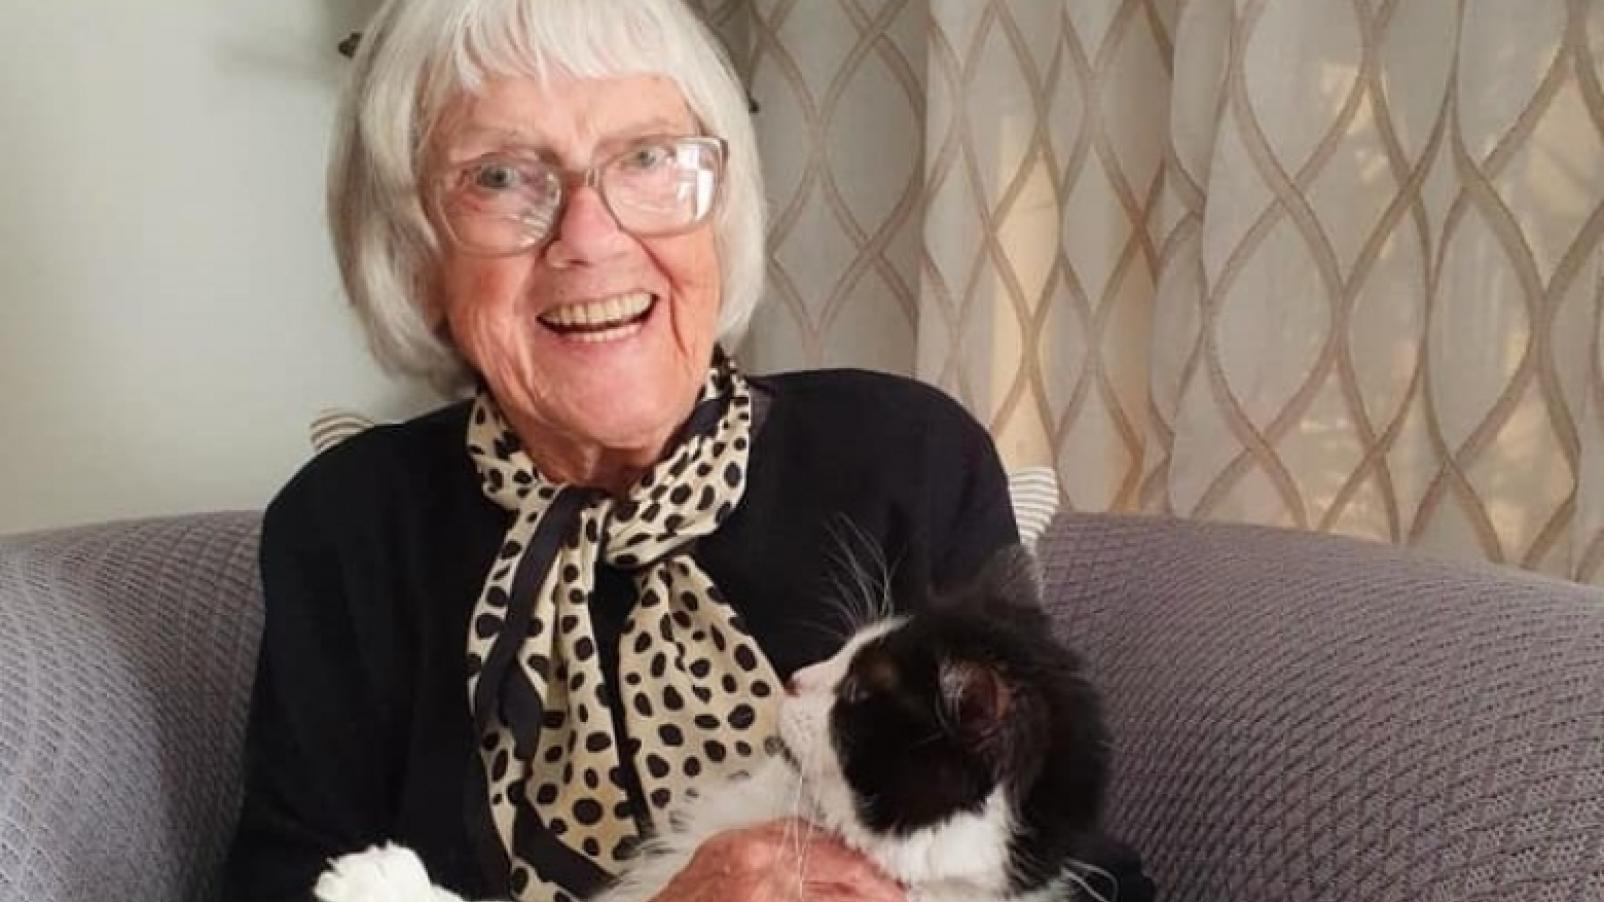 Oma sitting on a sofa and holding her cat Hailey.